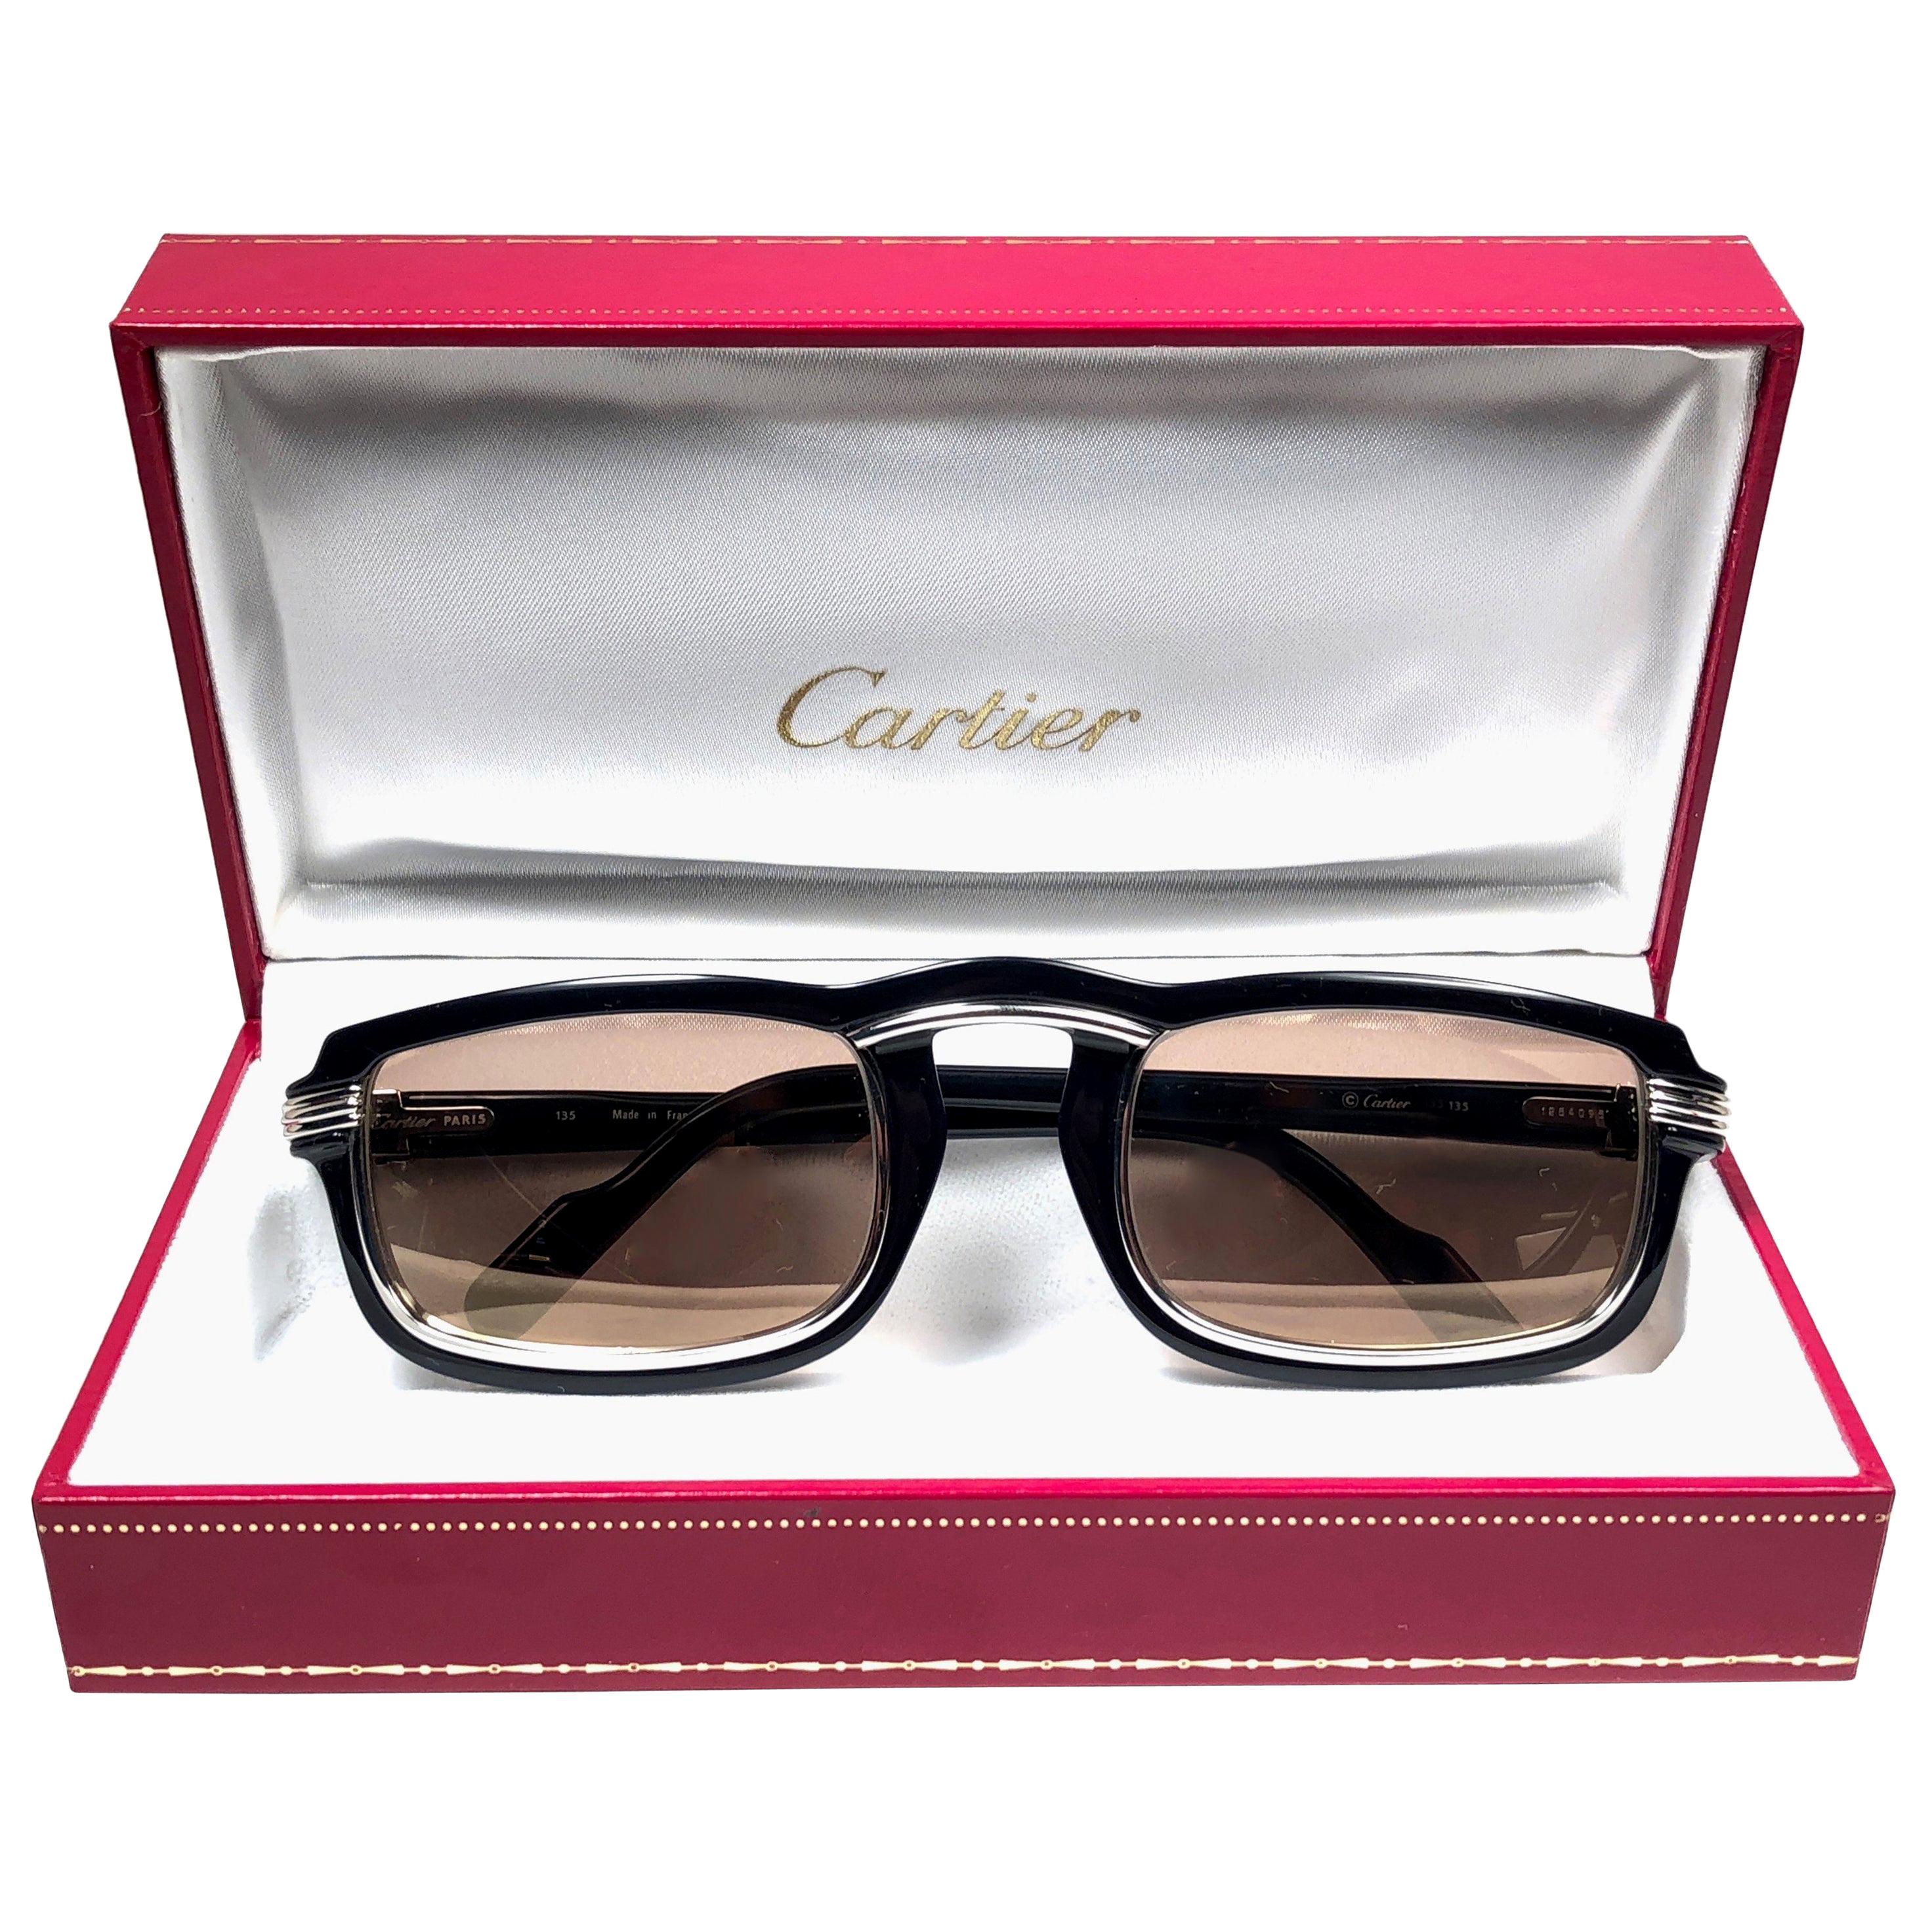 1991 Original Cartier Vertigo Art Deco Sunglasses with spotless amazing brown medium lenses (uv protection). 
Frame has the famous platinum accents in the middle and on the sides.
All hallmarks. Cartier signs on the earpaddles. Both arms sport the C